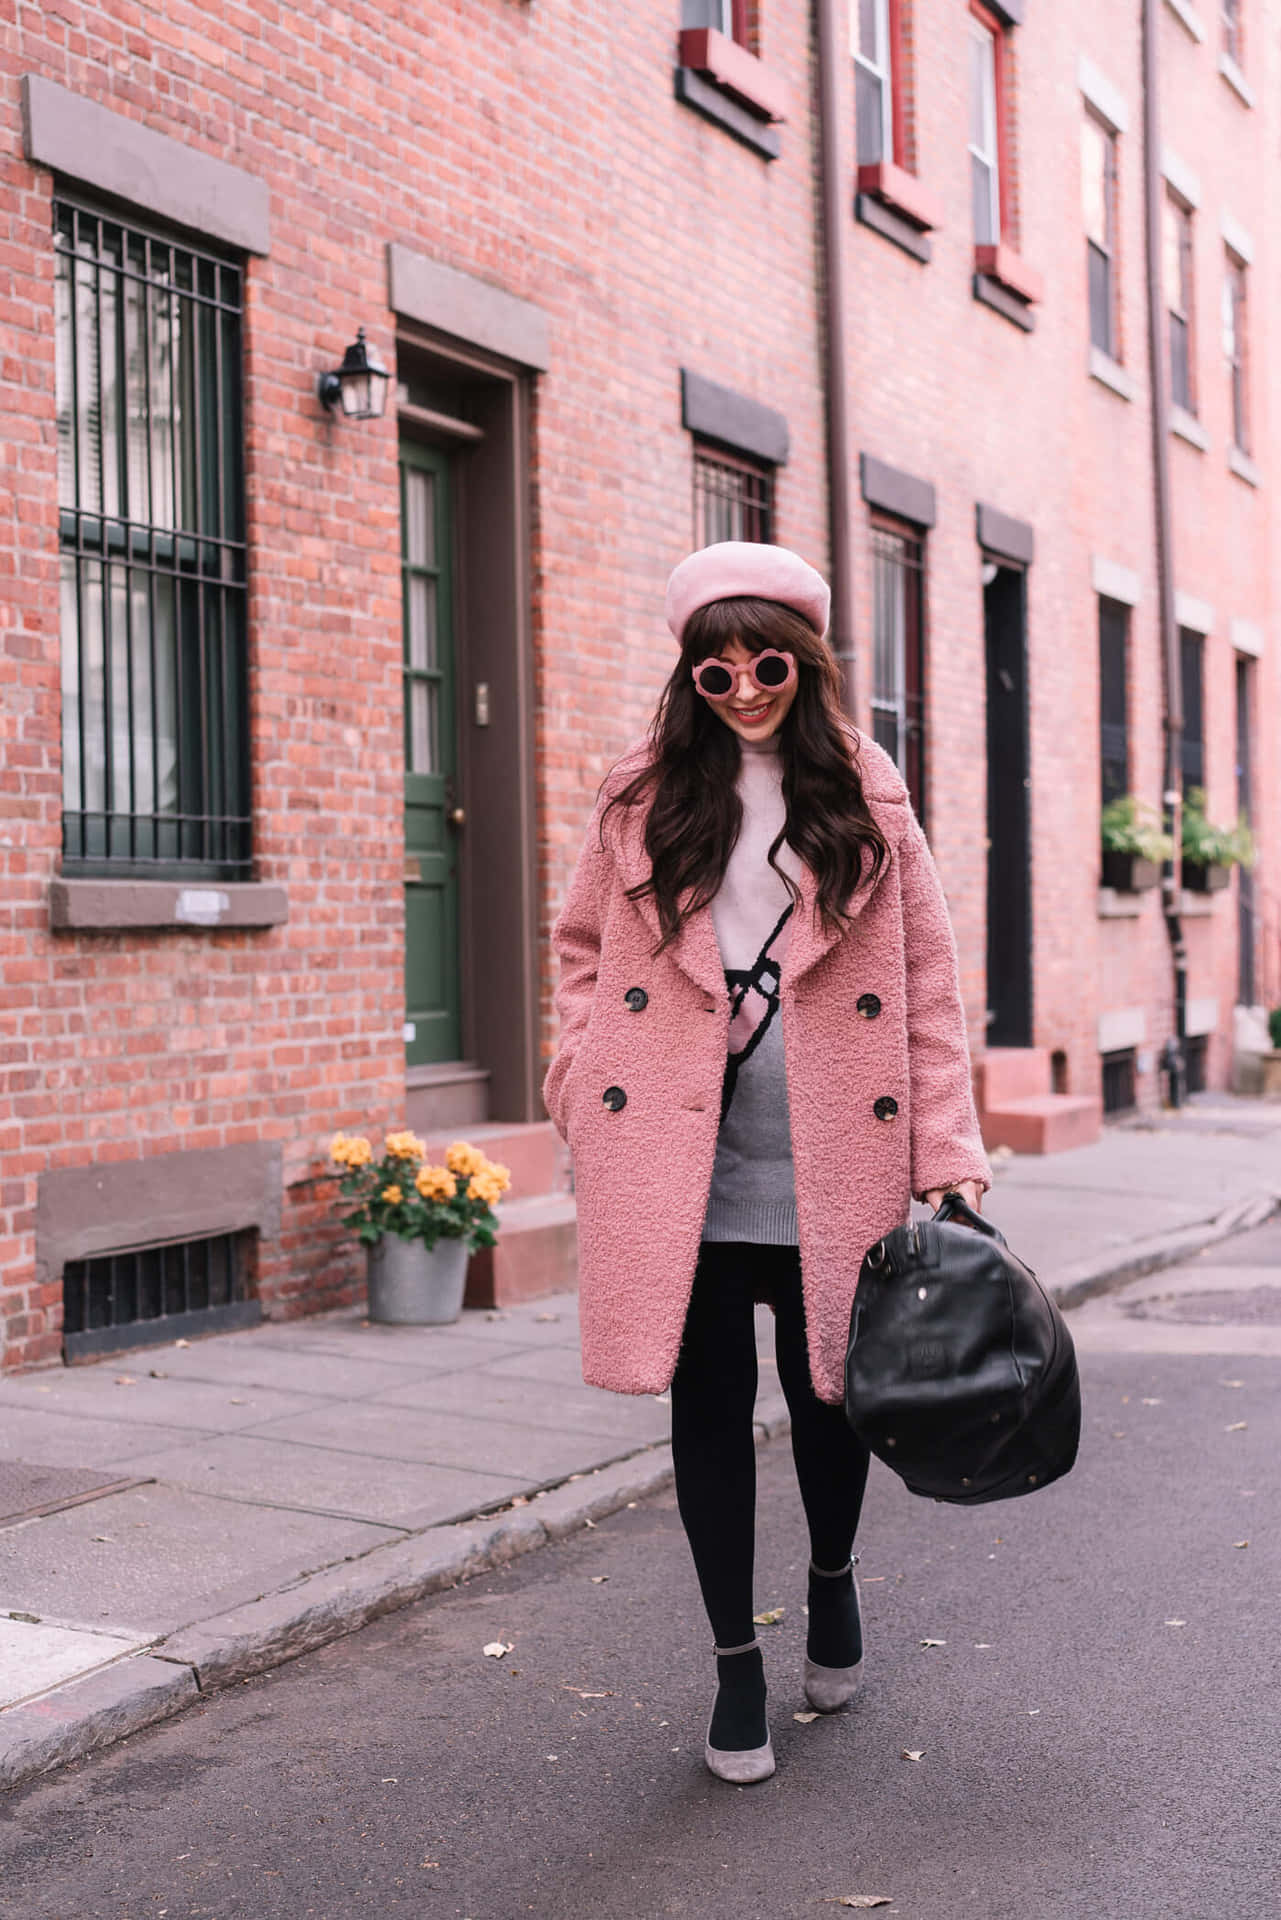 Stylish woman in a vibrant pink coat Wallpaper